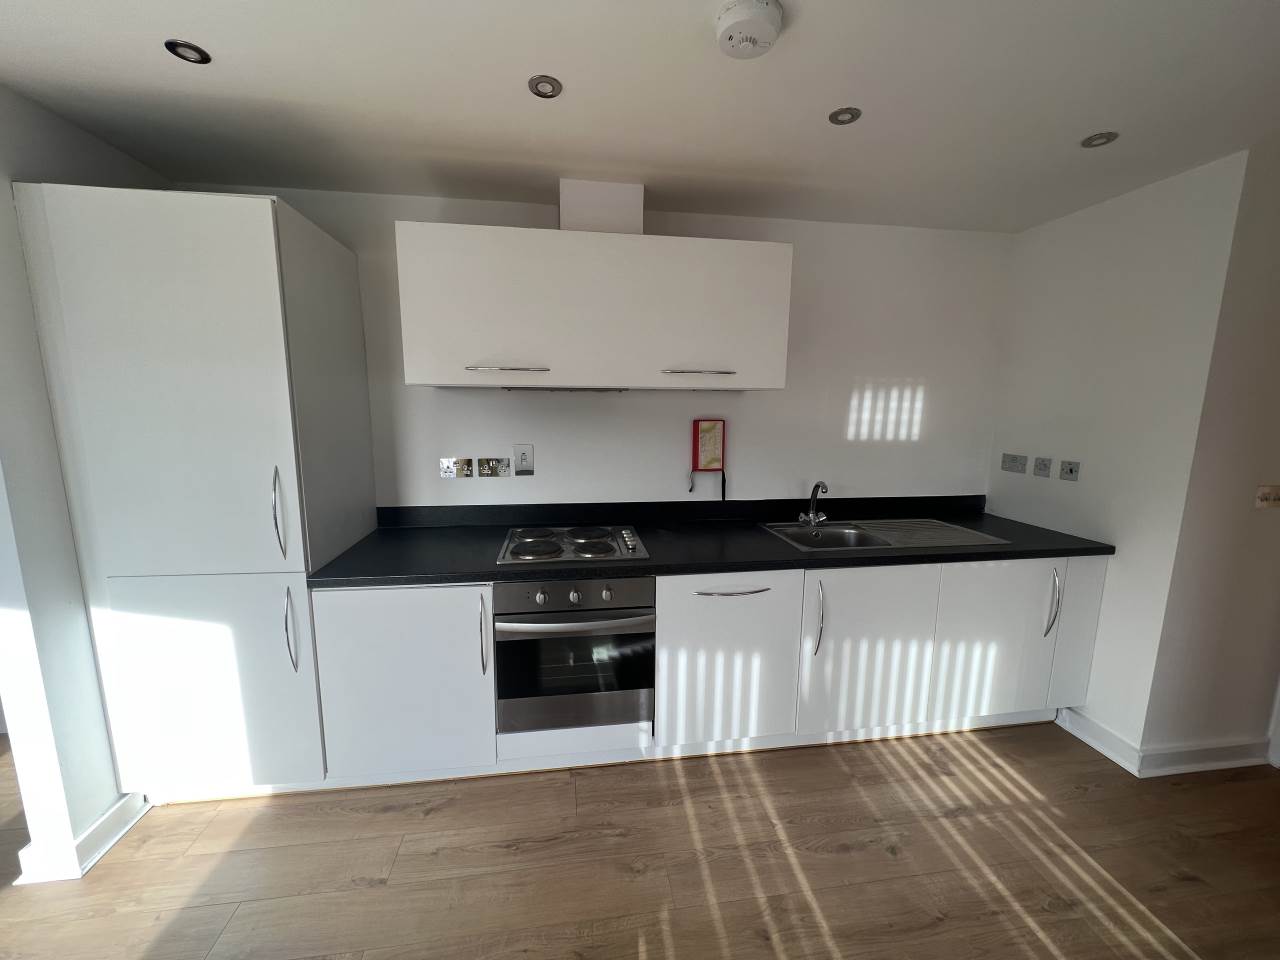 2 bed flat to rent in Granville Street (with one parking space) 1